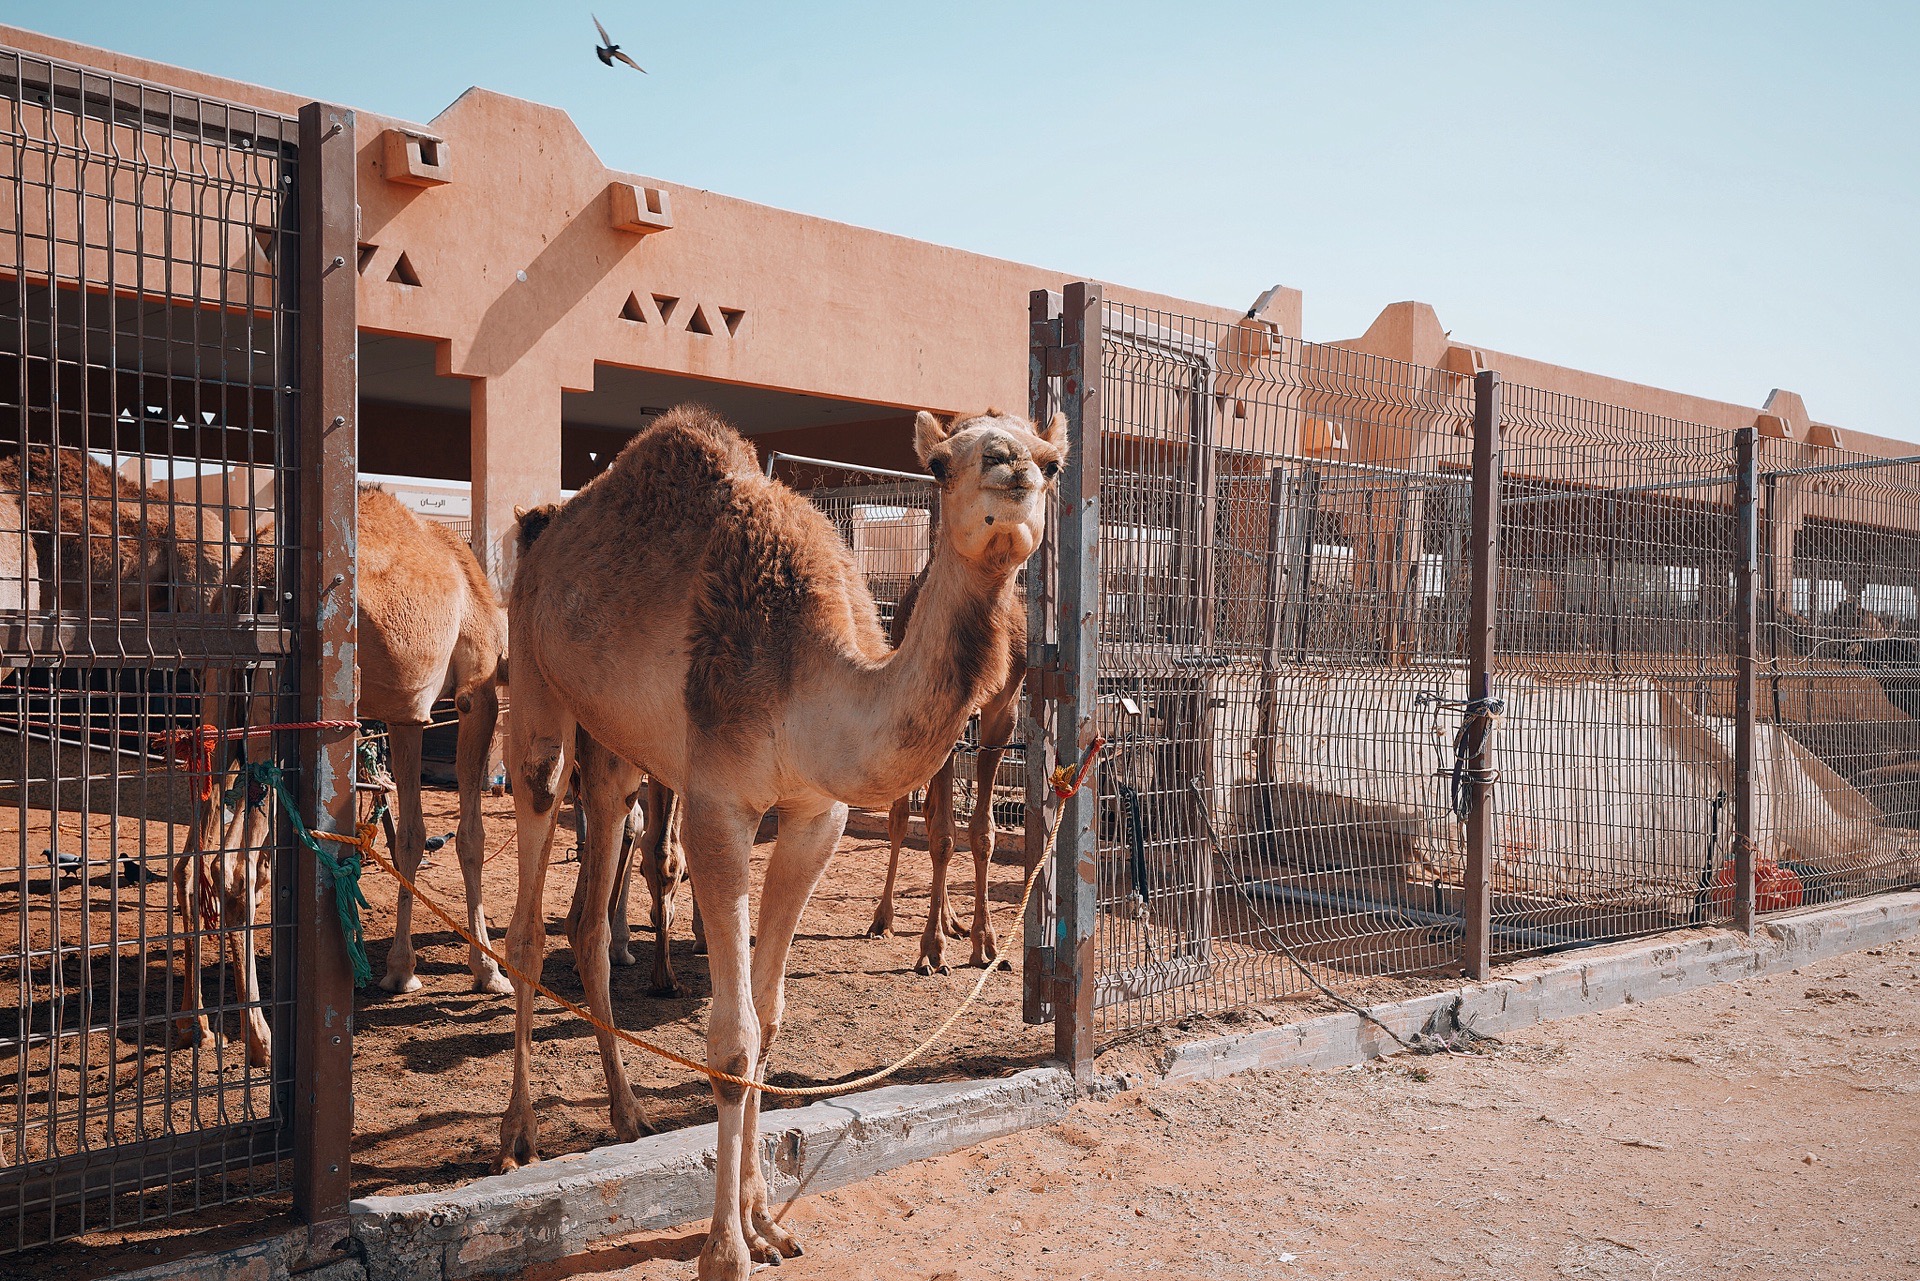 Latest travel itineraries for Al Ain Camel Market in July (updated in 2023), Al Ain Camel Market reviews, Al Ain Camel Market address and opening hours, popular attractions, hotels, and restaurants near